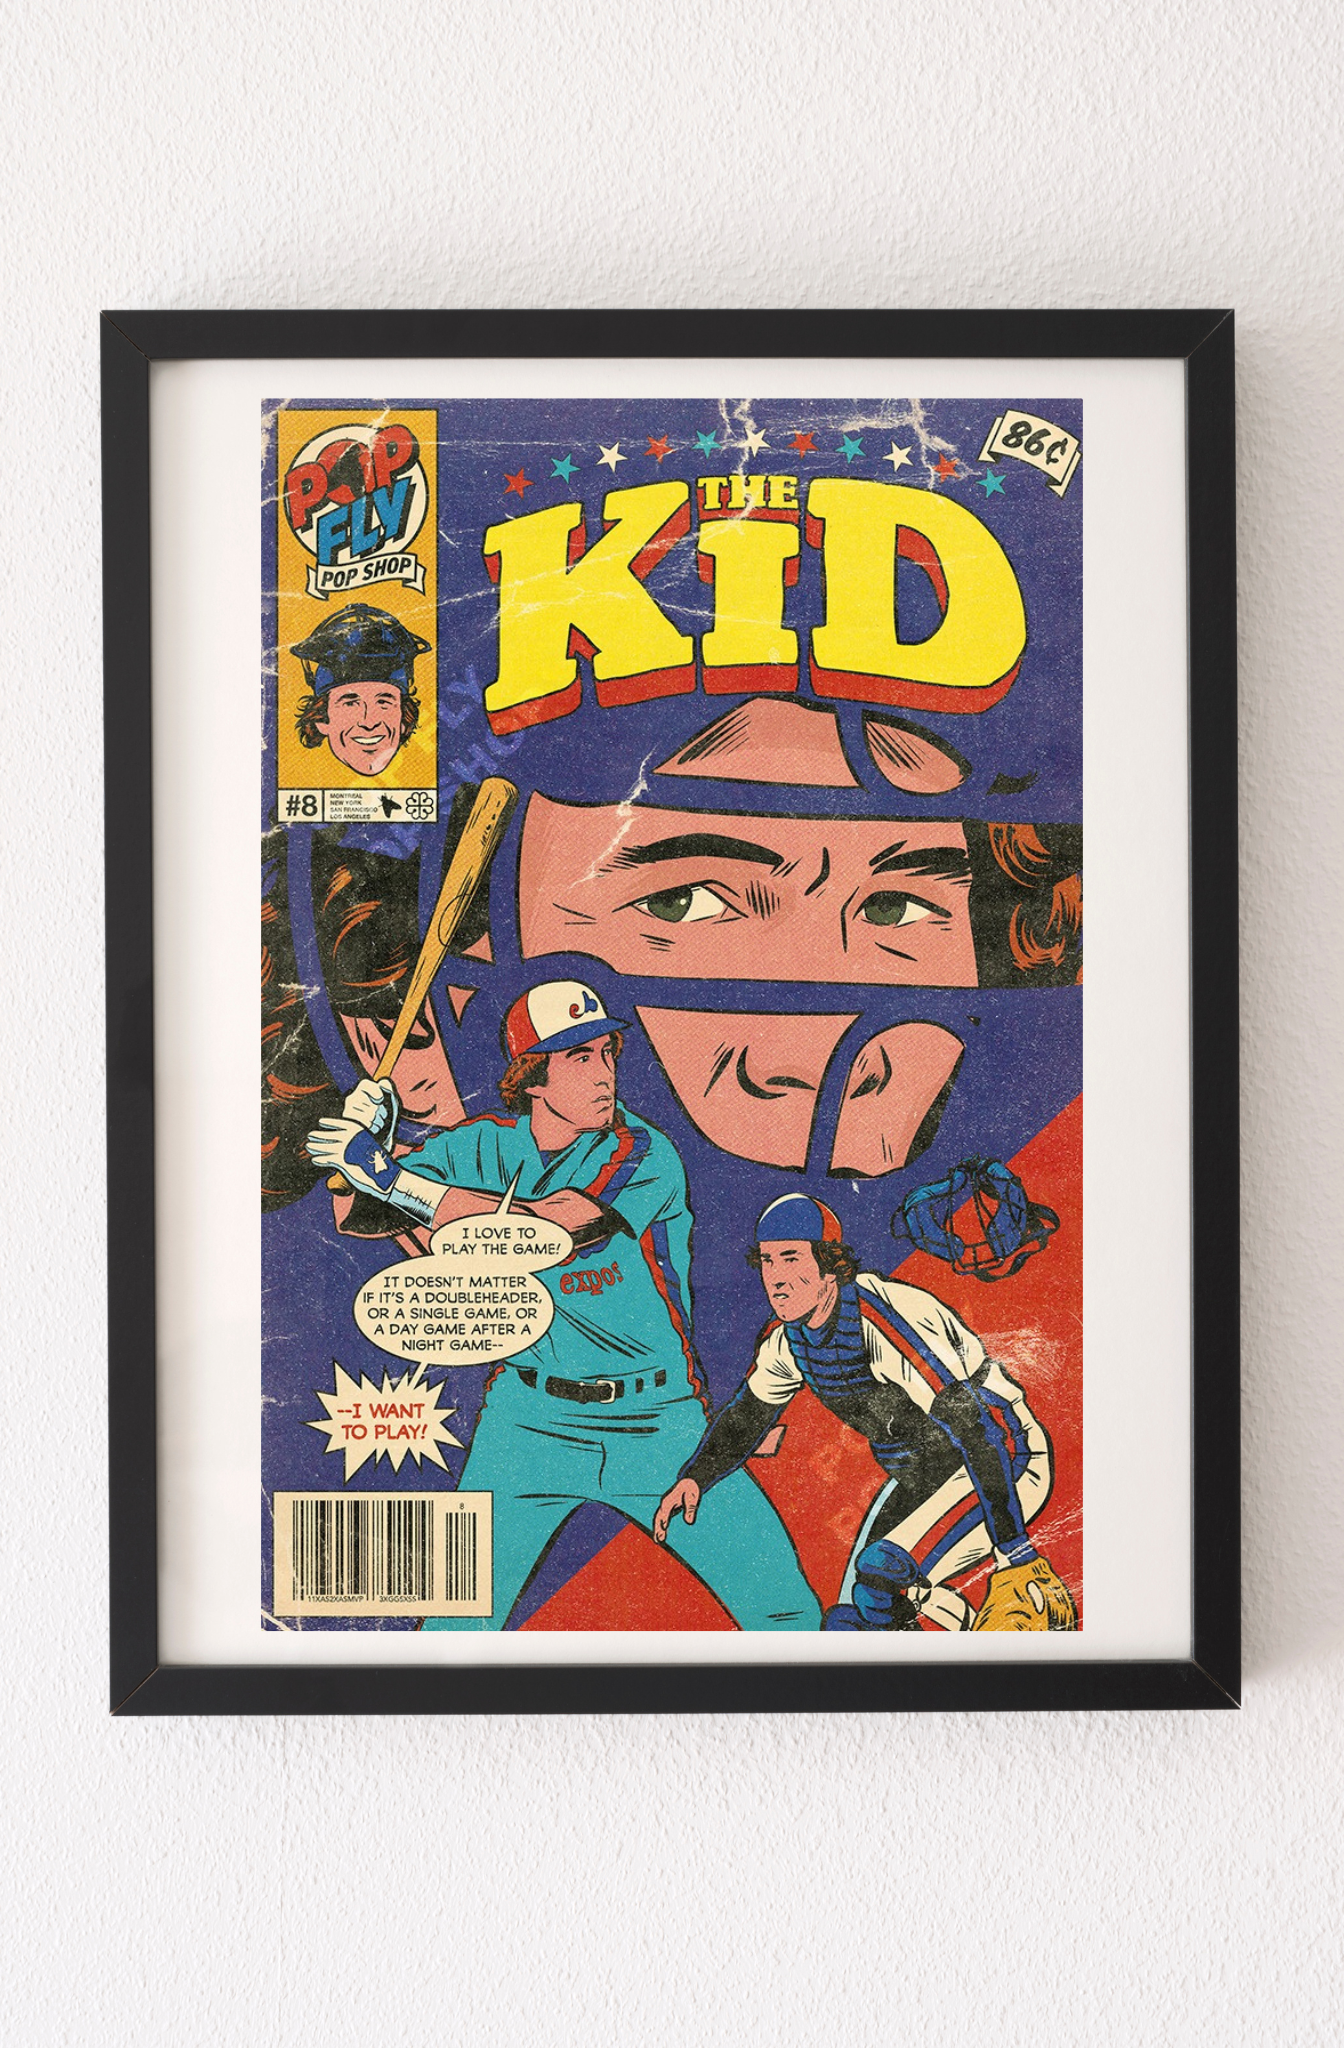 98. (SOLD OUT) "The Kid" 7" x 10.5" Art Print